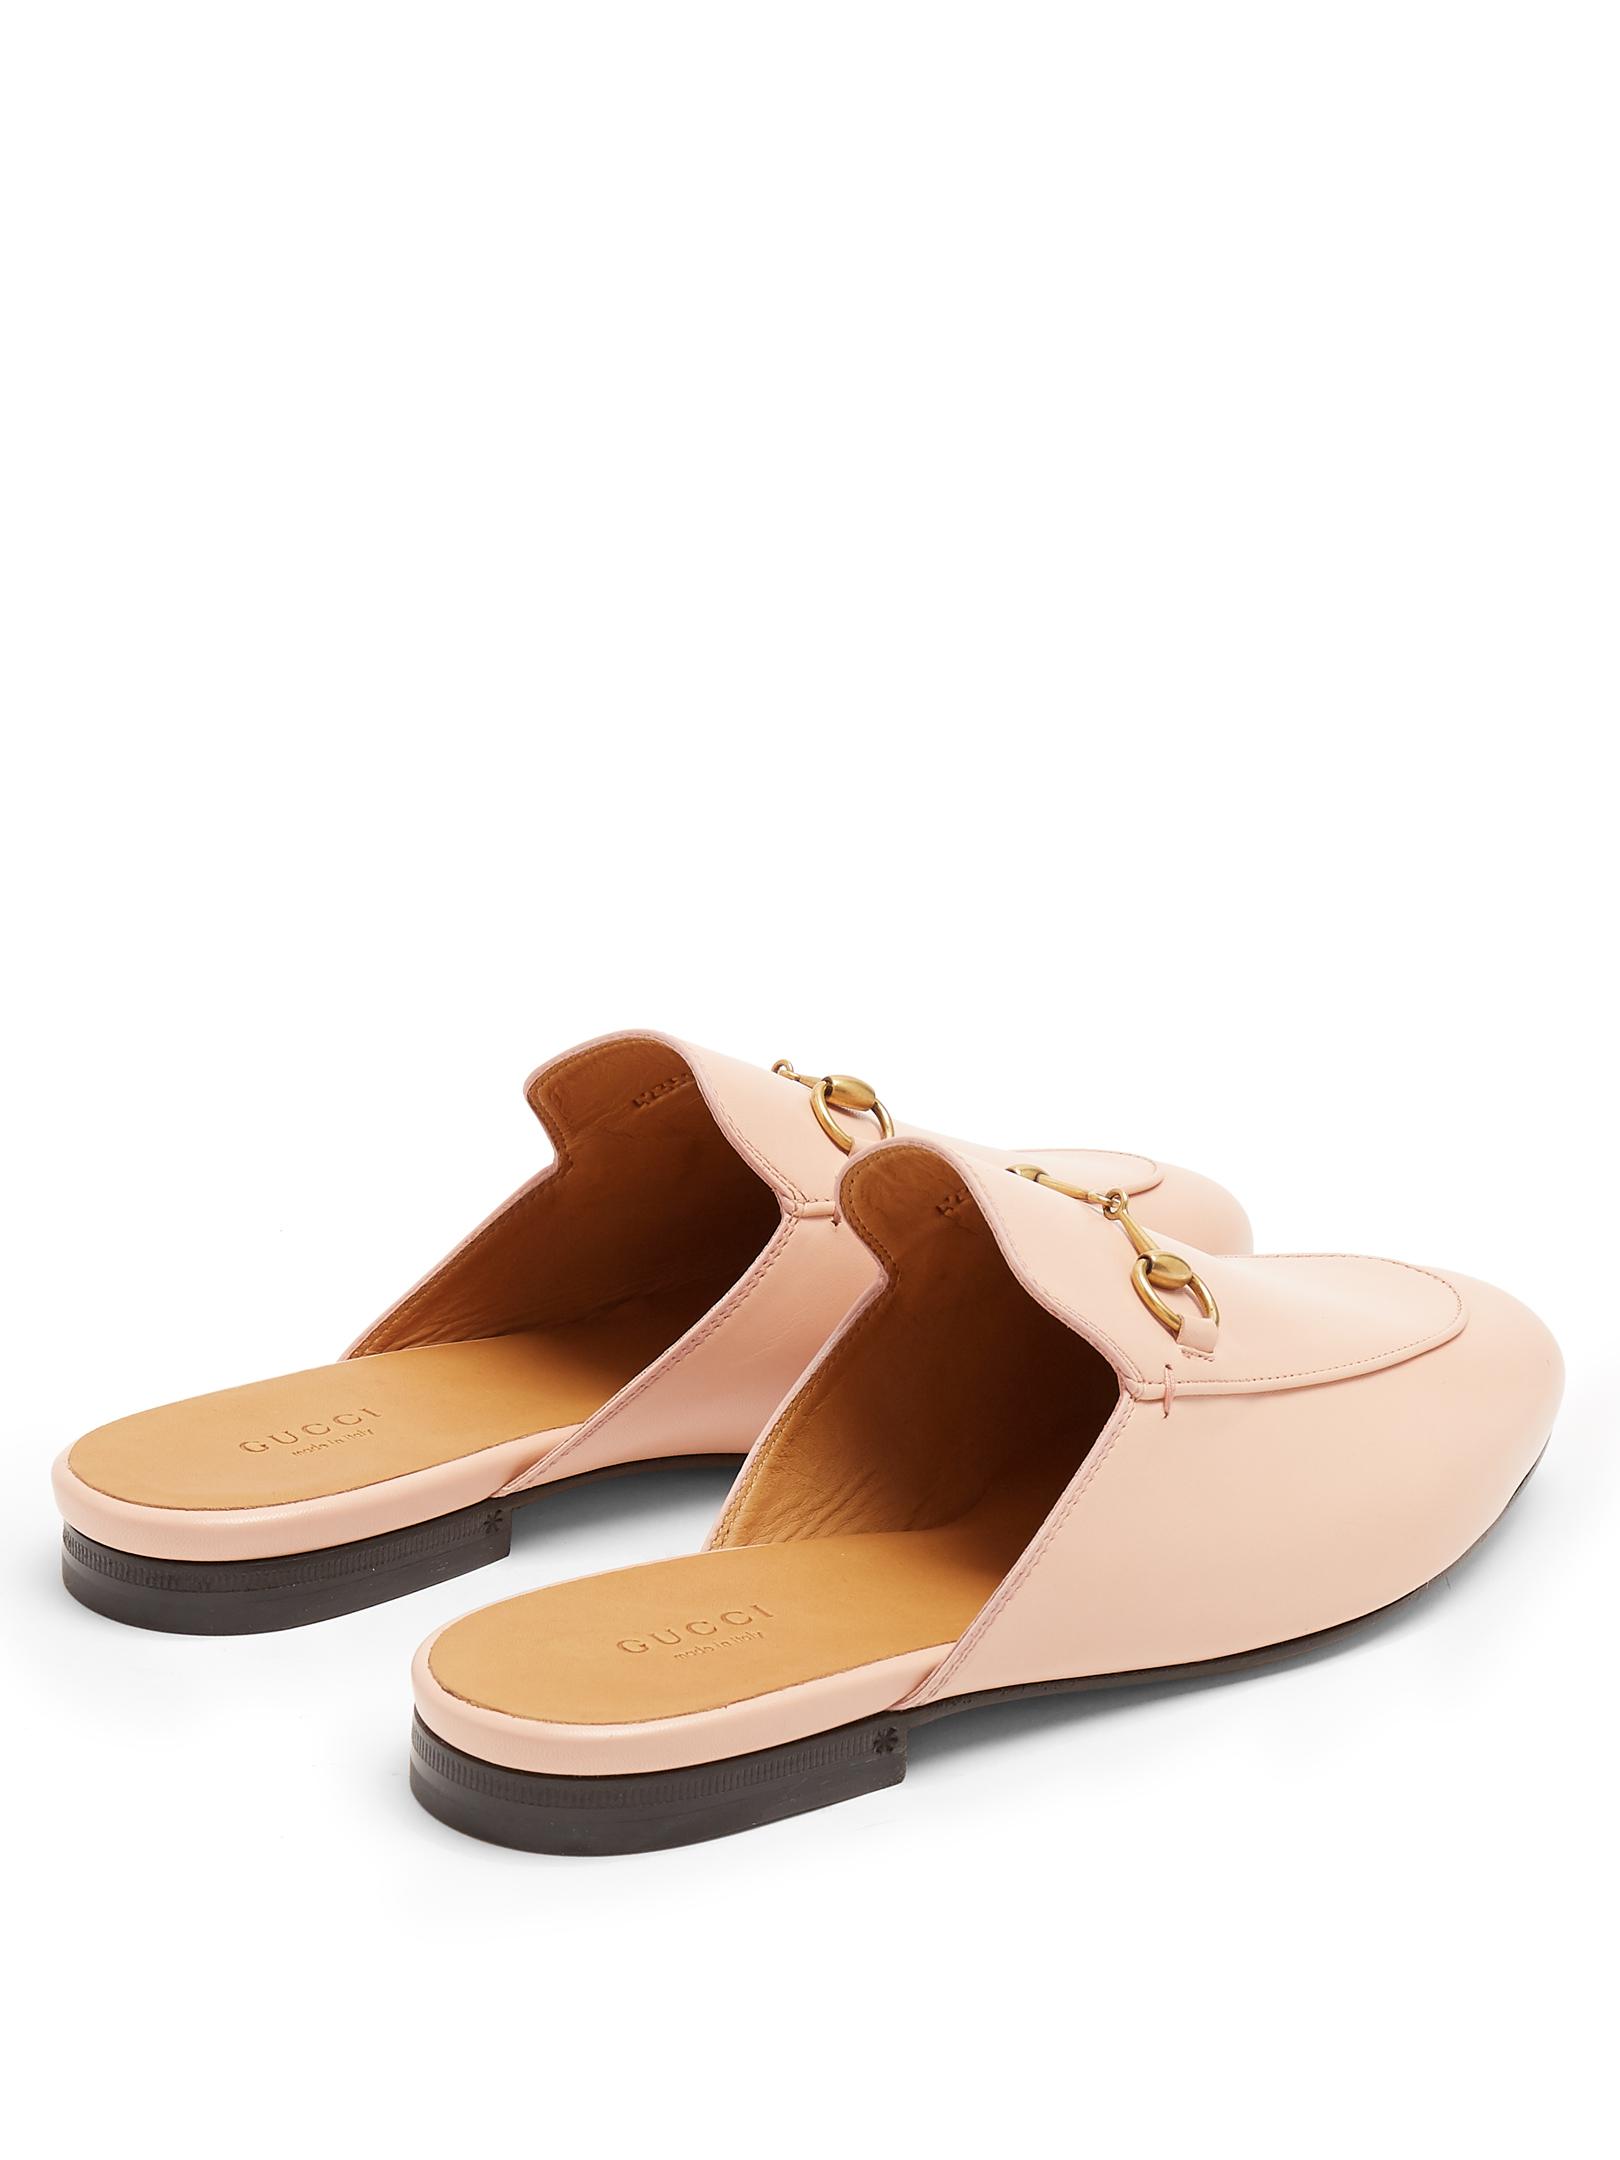 Gucci Princetown Leather Backless Loafers in Pink | Lyst UK